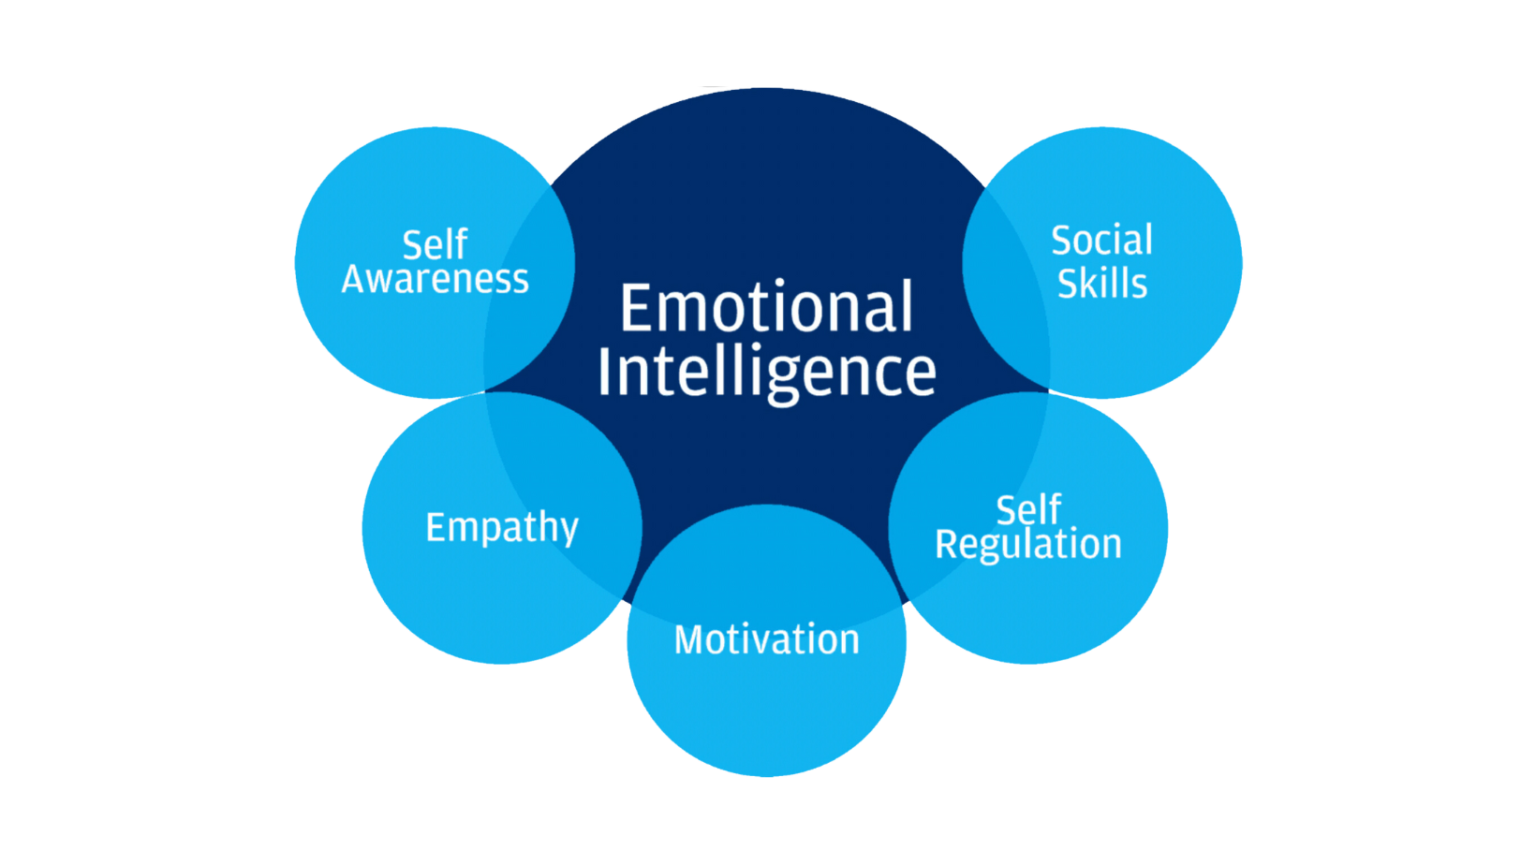 The Ripple Effect Emotional Intelligence Has on Leader